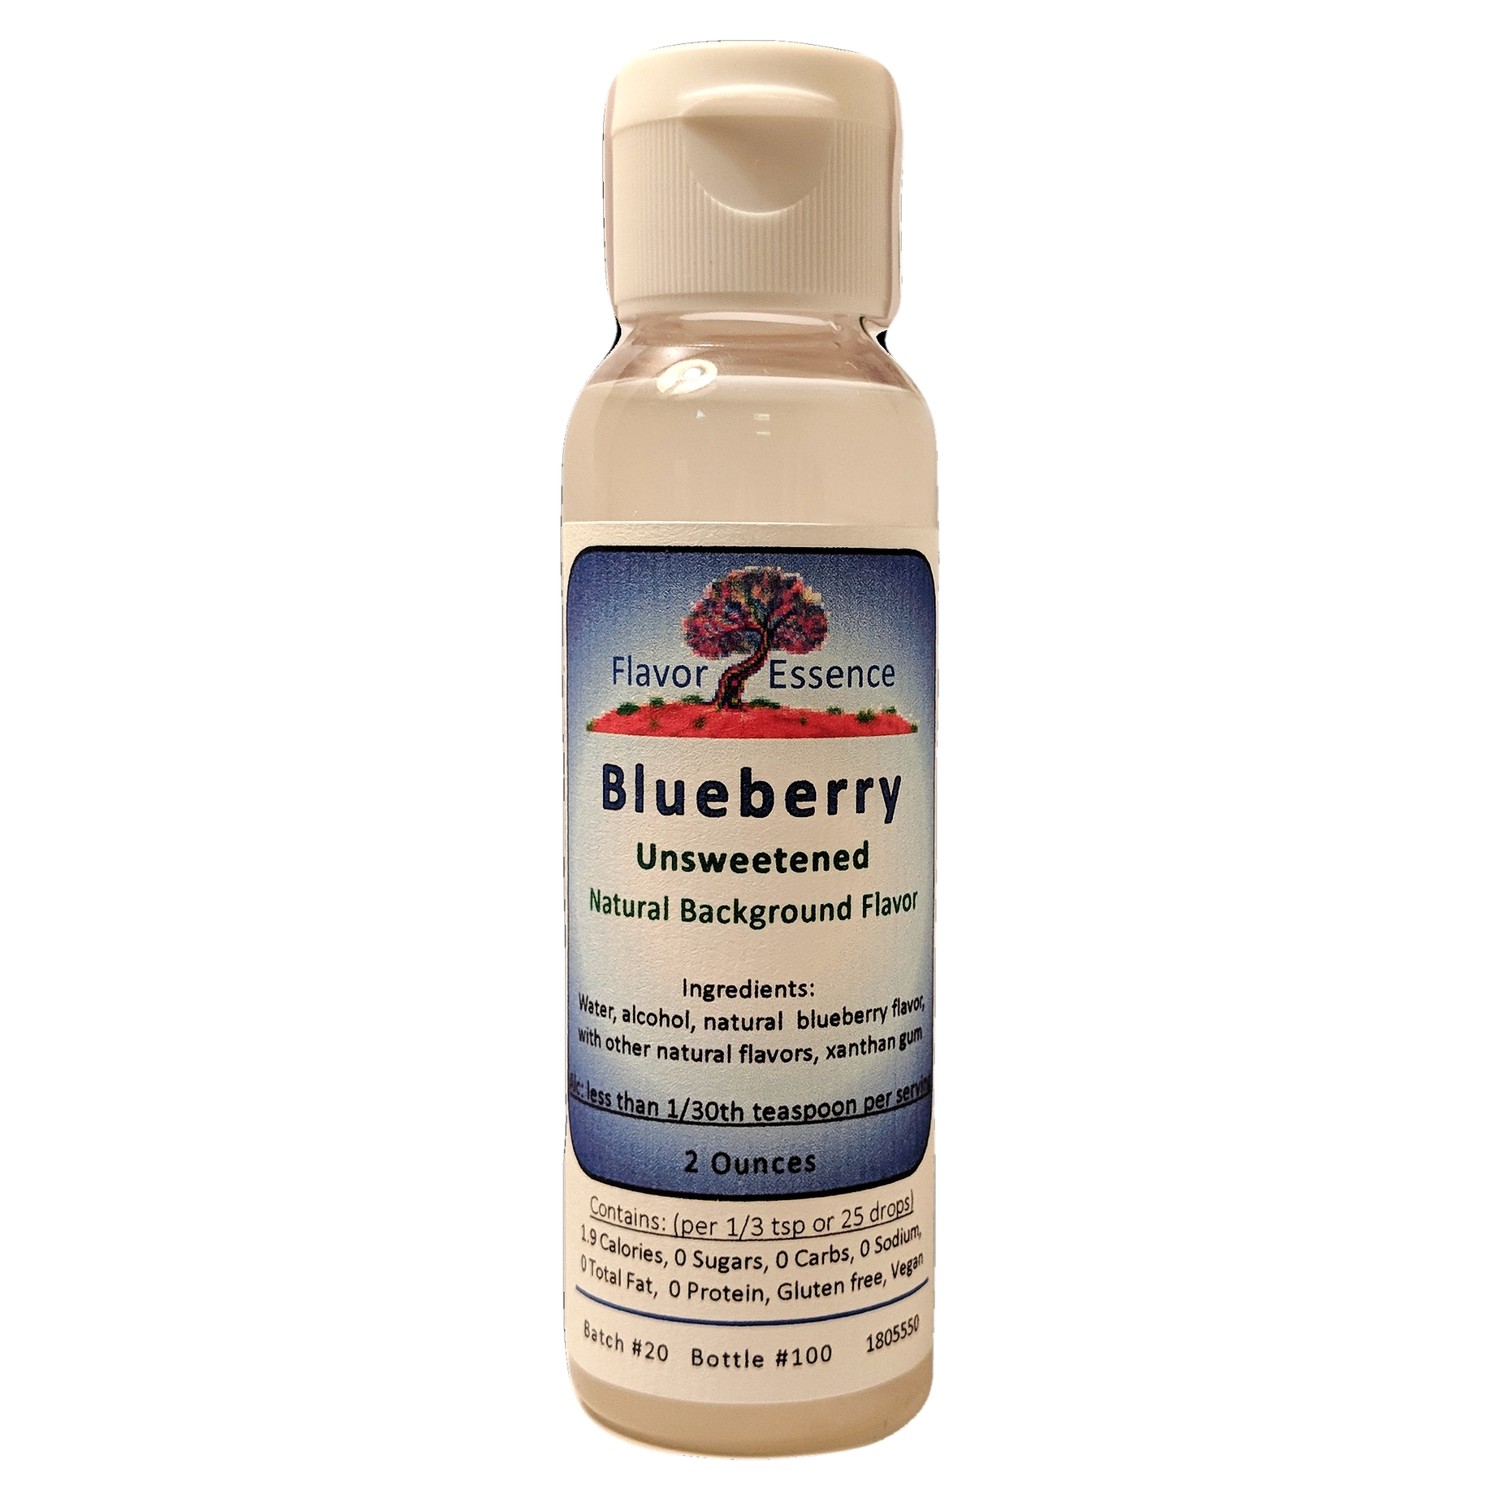 Flavor Essence Blueberry 2oz - Natural Unsweetened Background Flavoring